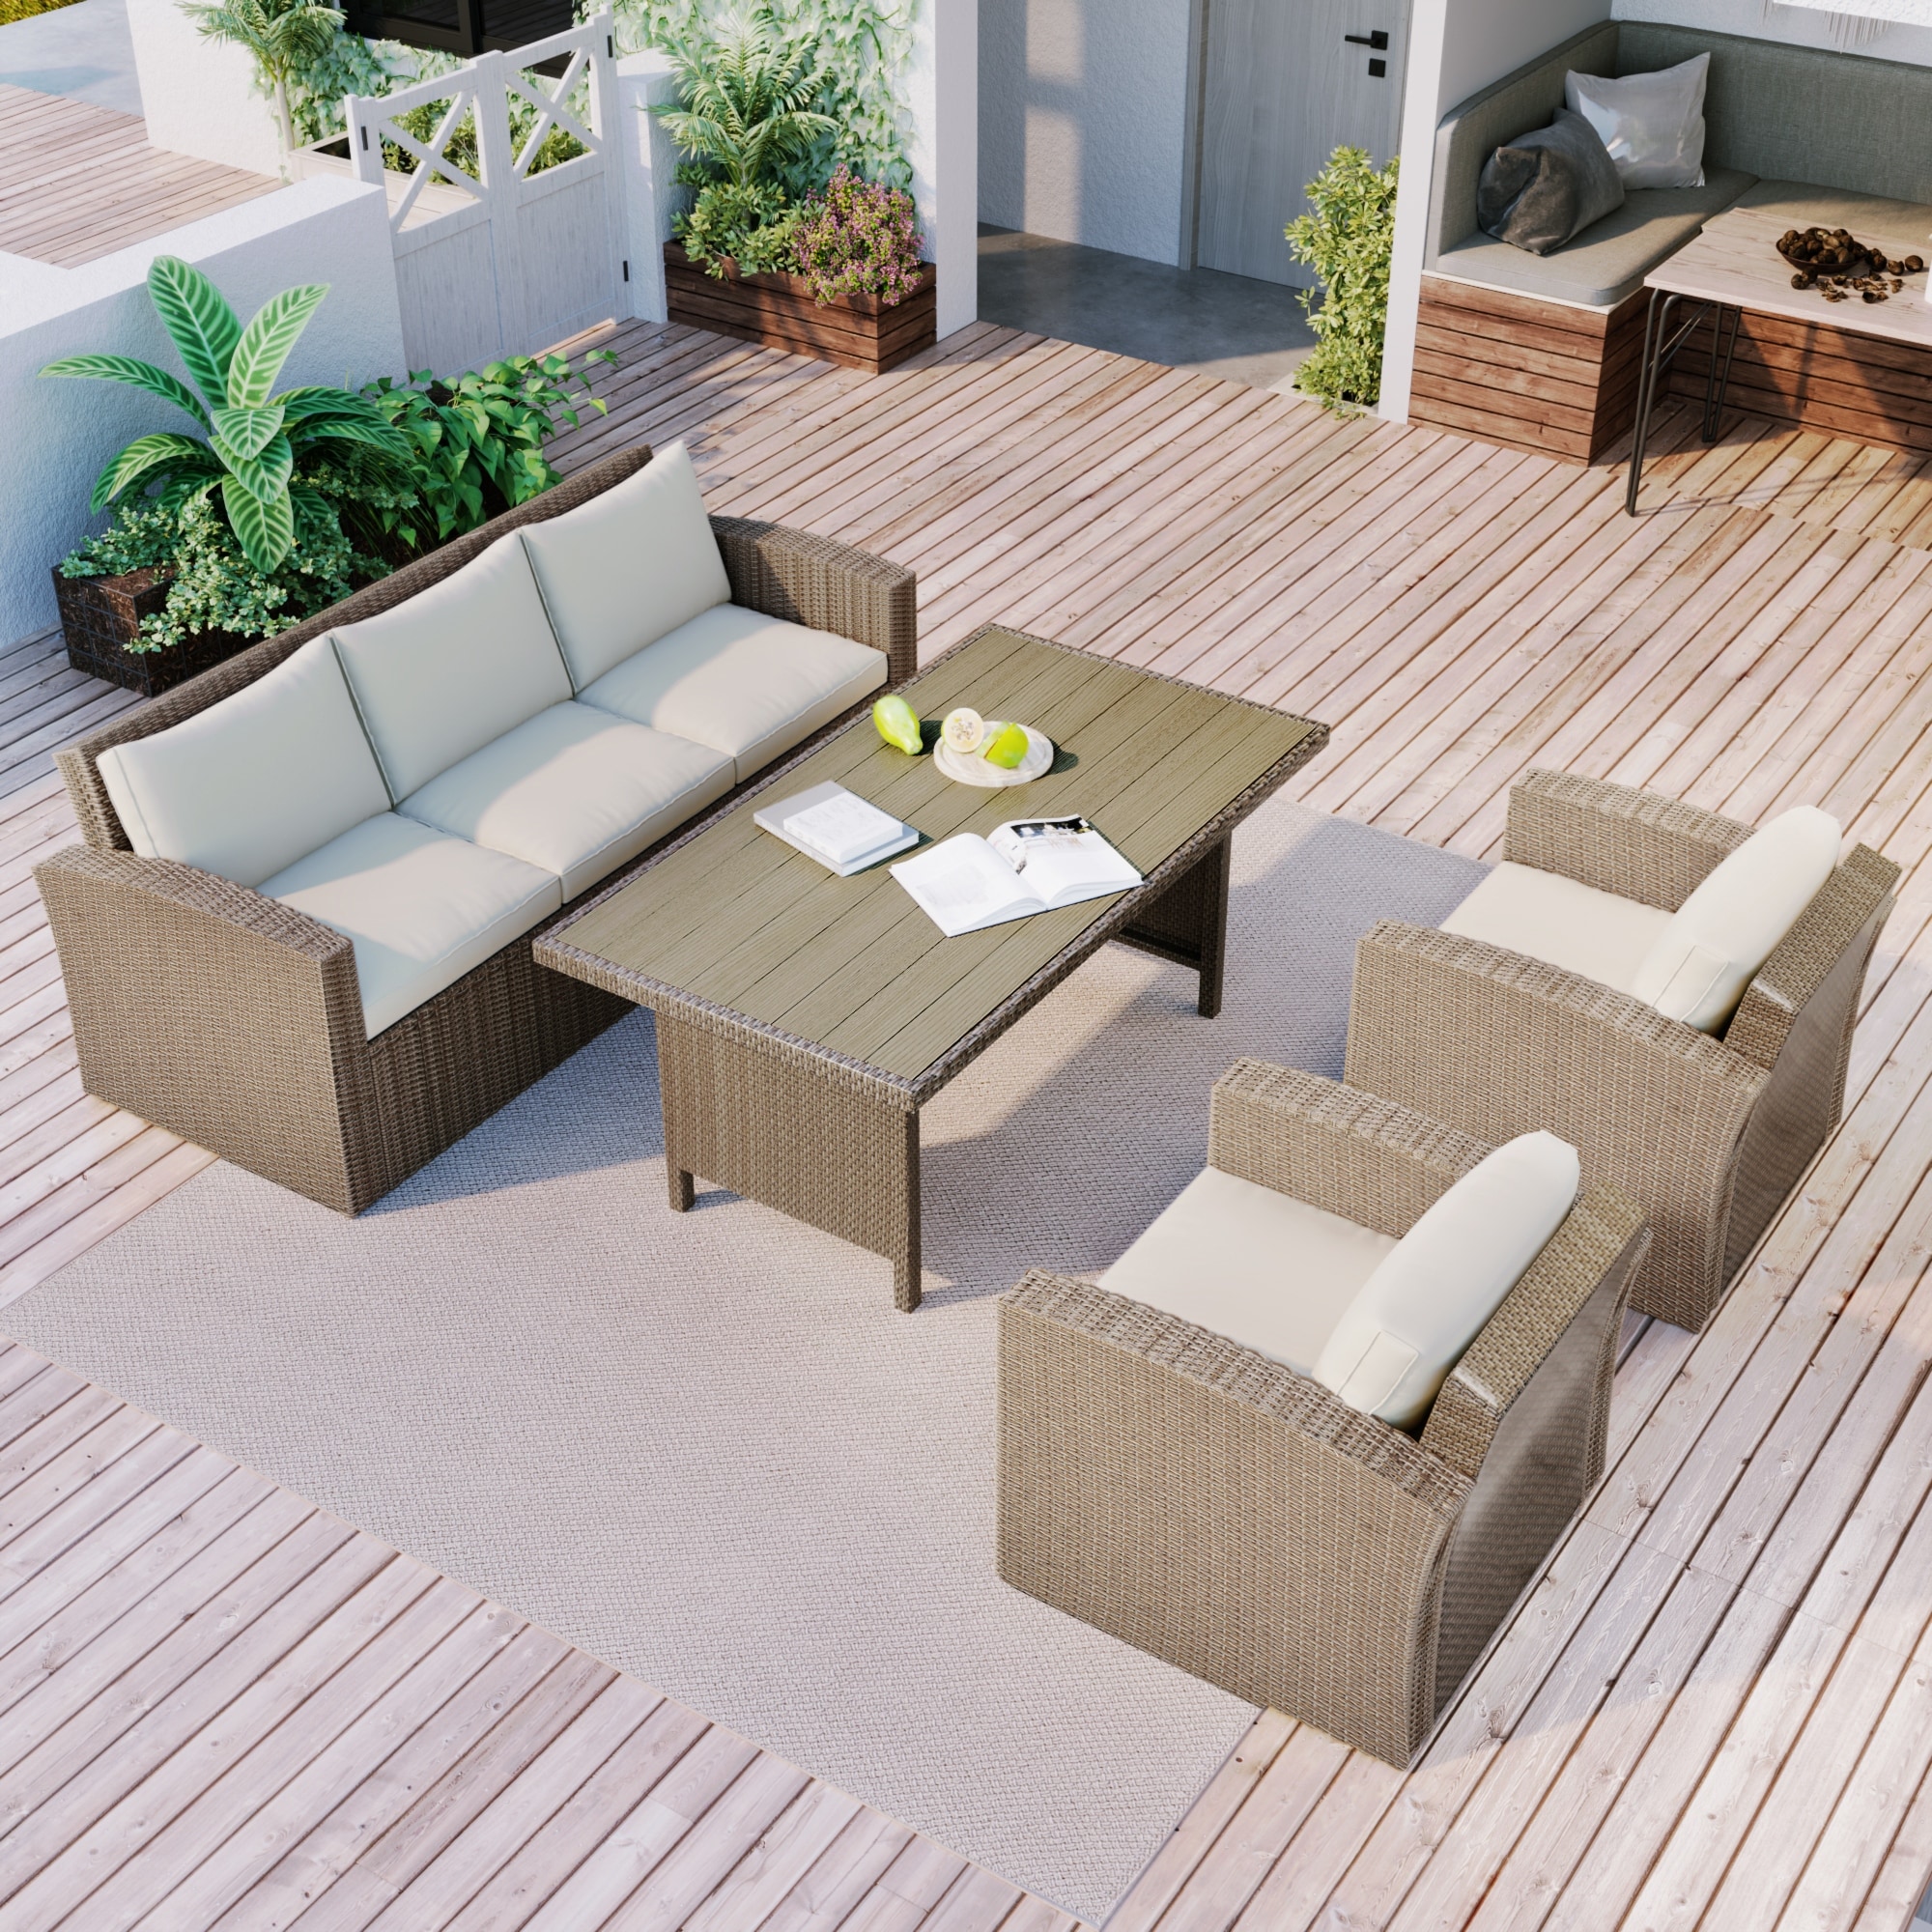 4-piece Wicker Furniture Set With Table and Cushions